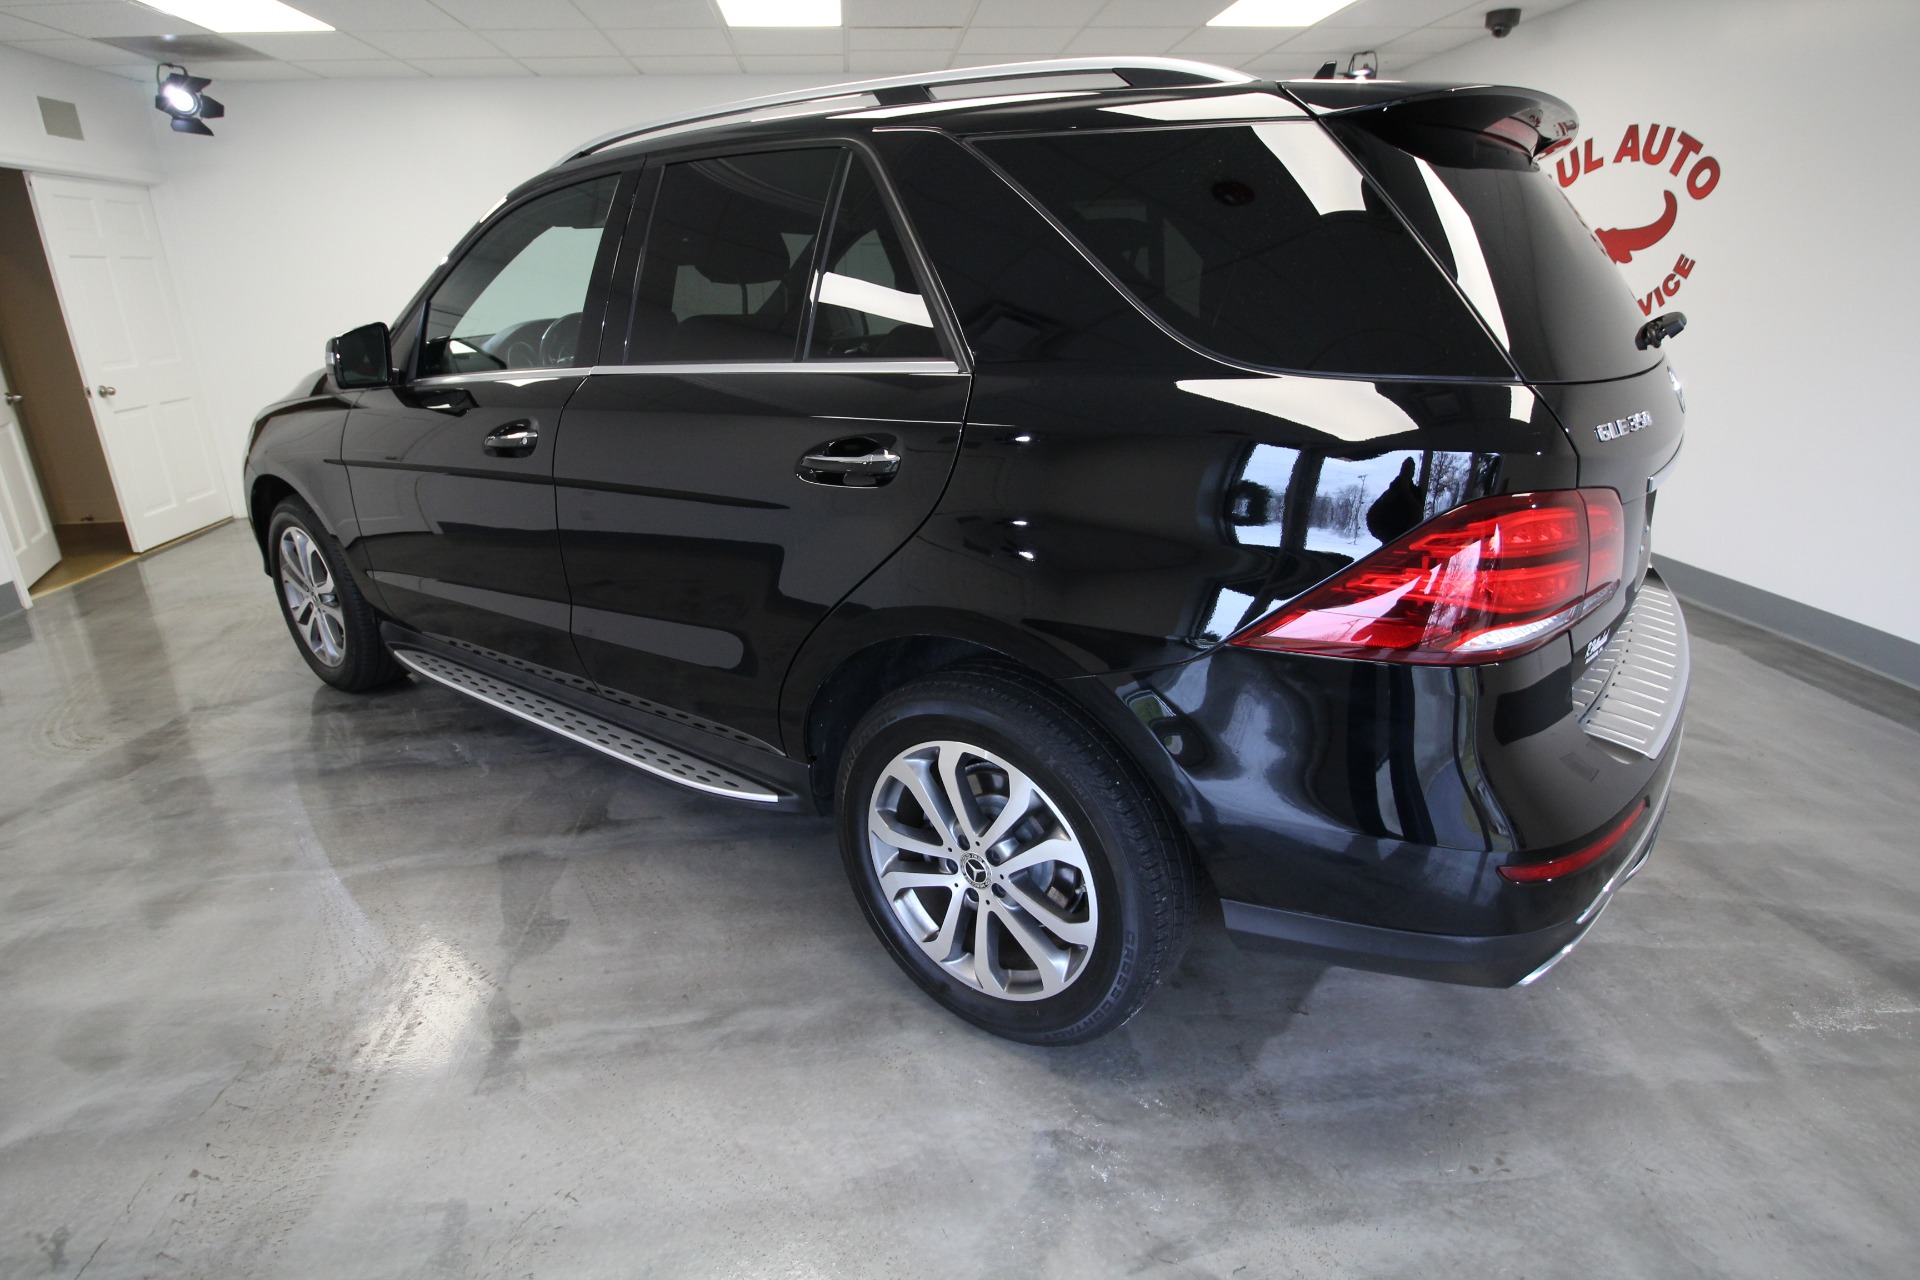 Used 2018 Black Mercedes-Benz GLE-Class GLE350 4MATIC AWD LOW MILES LOADED WITH OPTIONS | Albany, NY